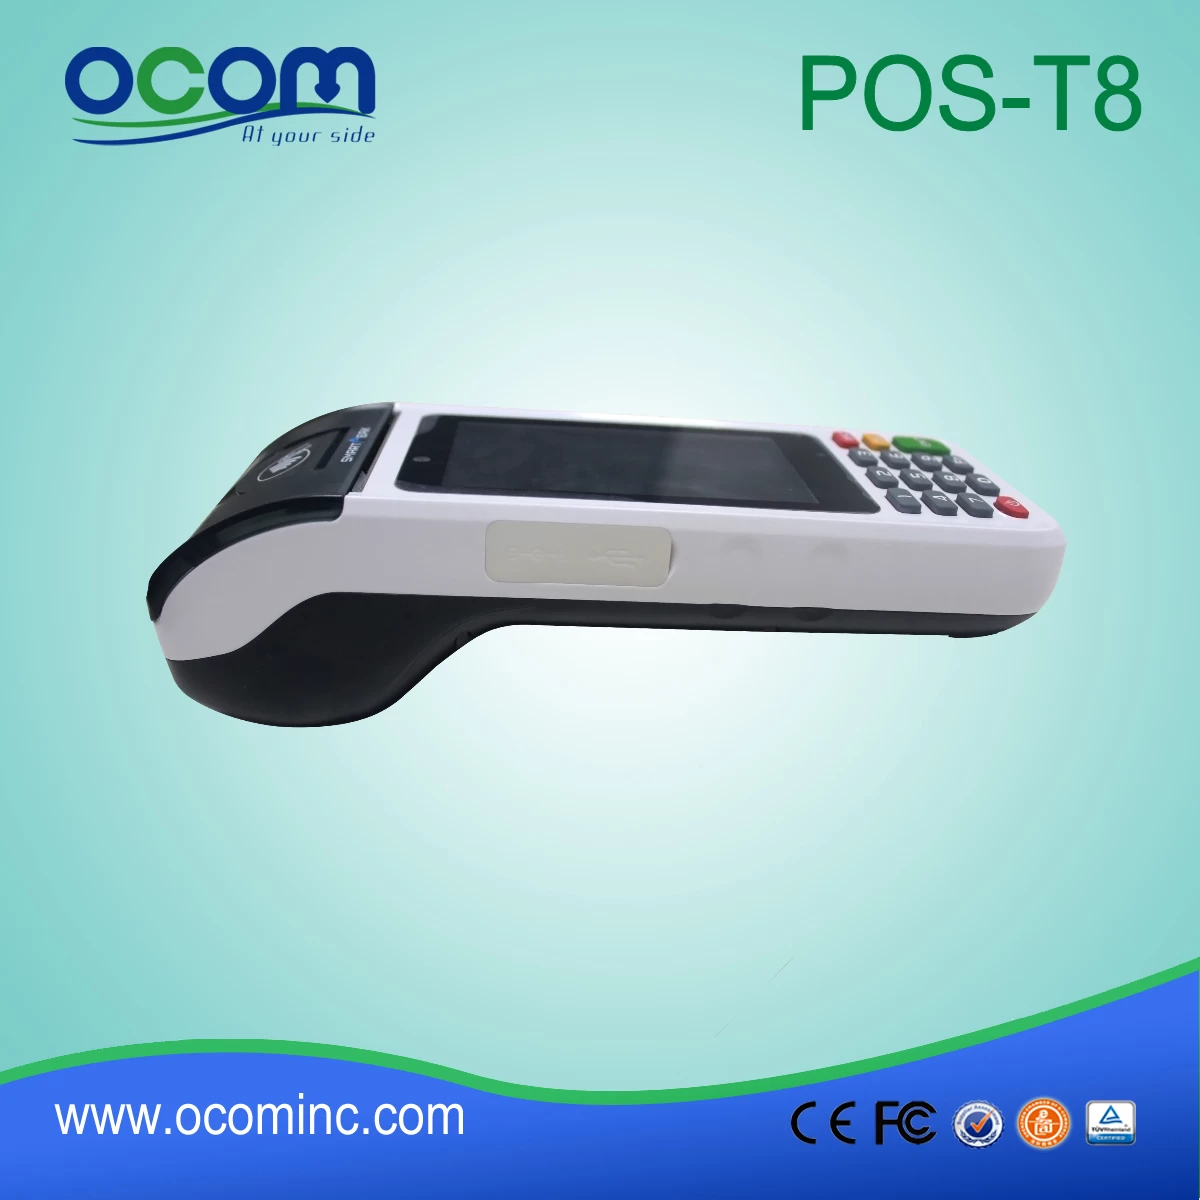 Mobile pos terminal with NFC Reader (POS-T8)